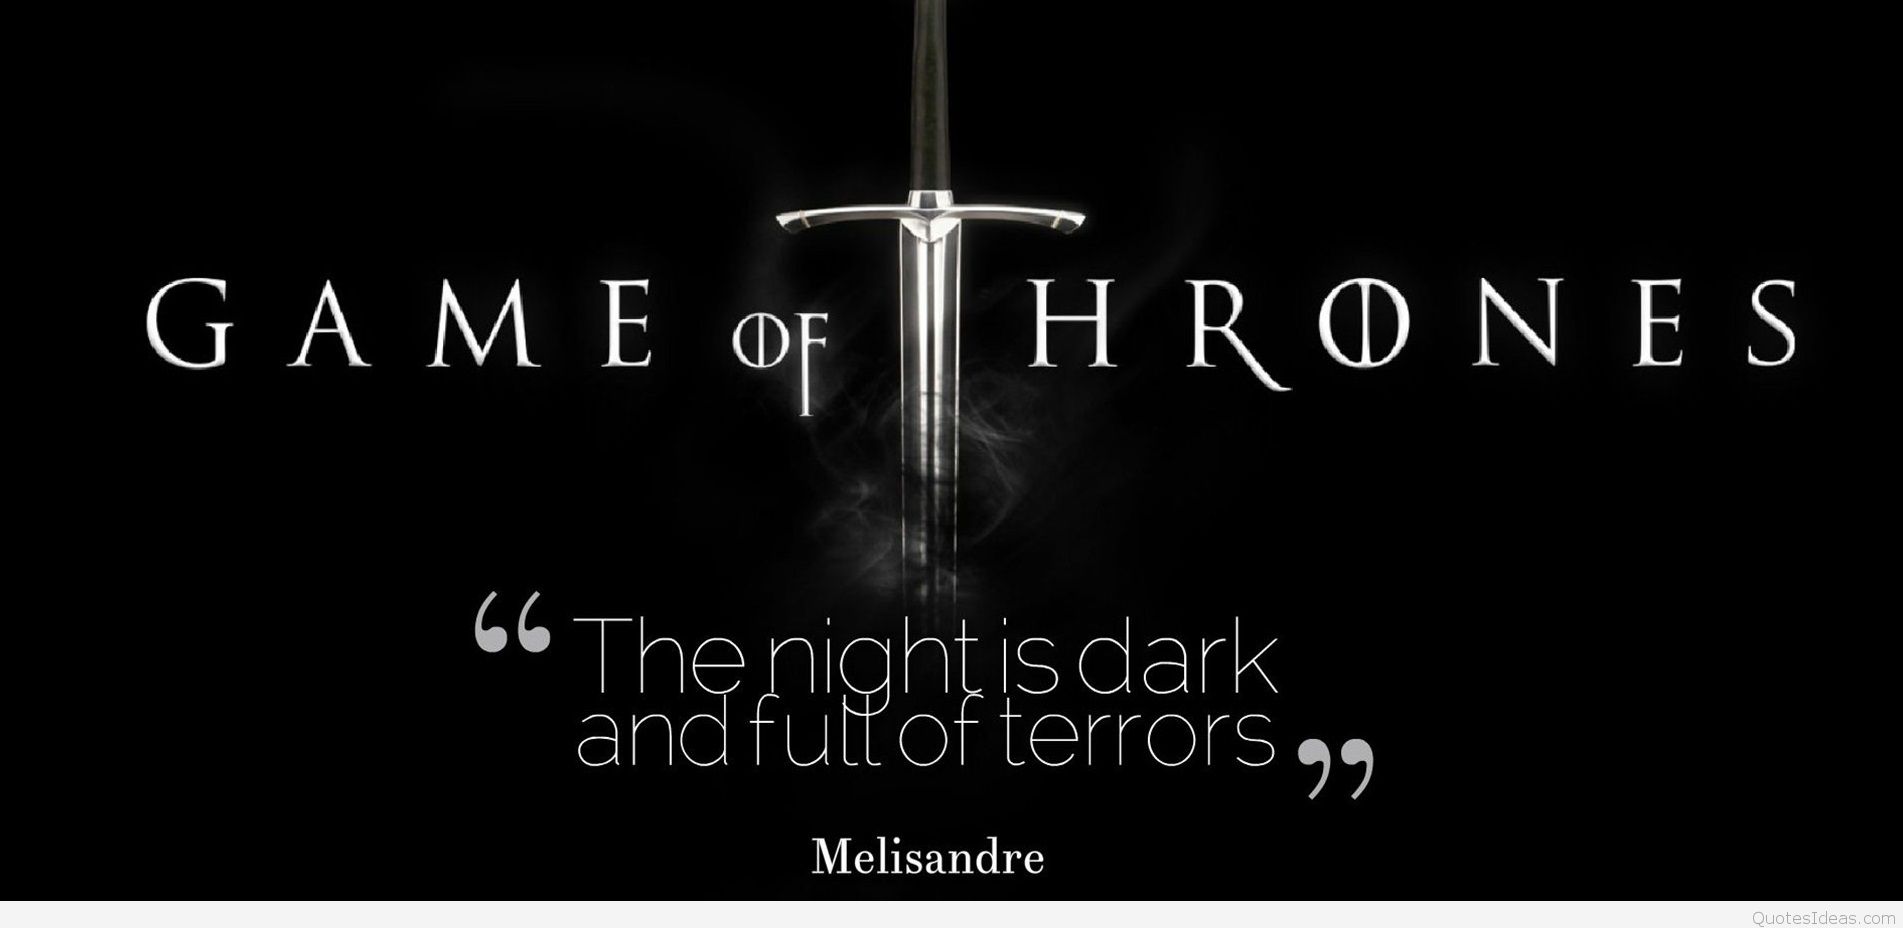 Game Of Thrones Melisandre Quotes Wallpaper - Game Of Thrones Wallpaper Quotes - HD Wallpaper 